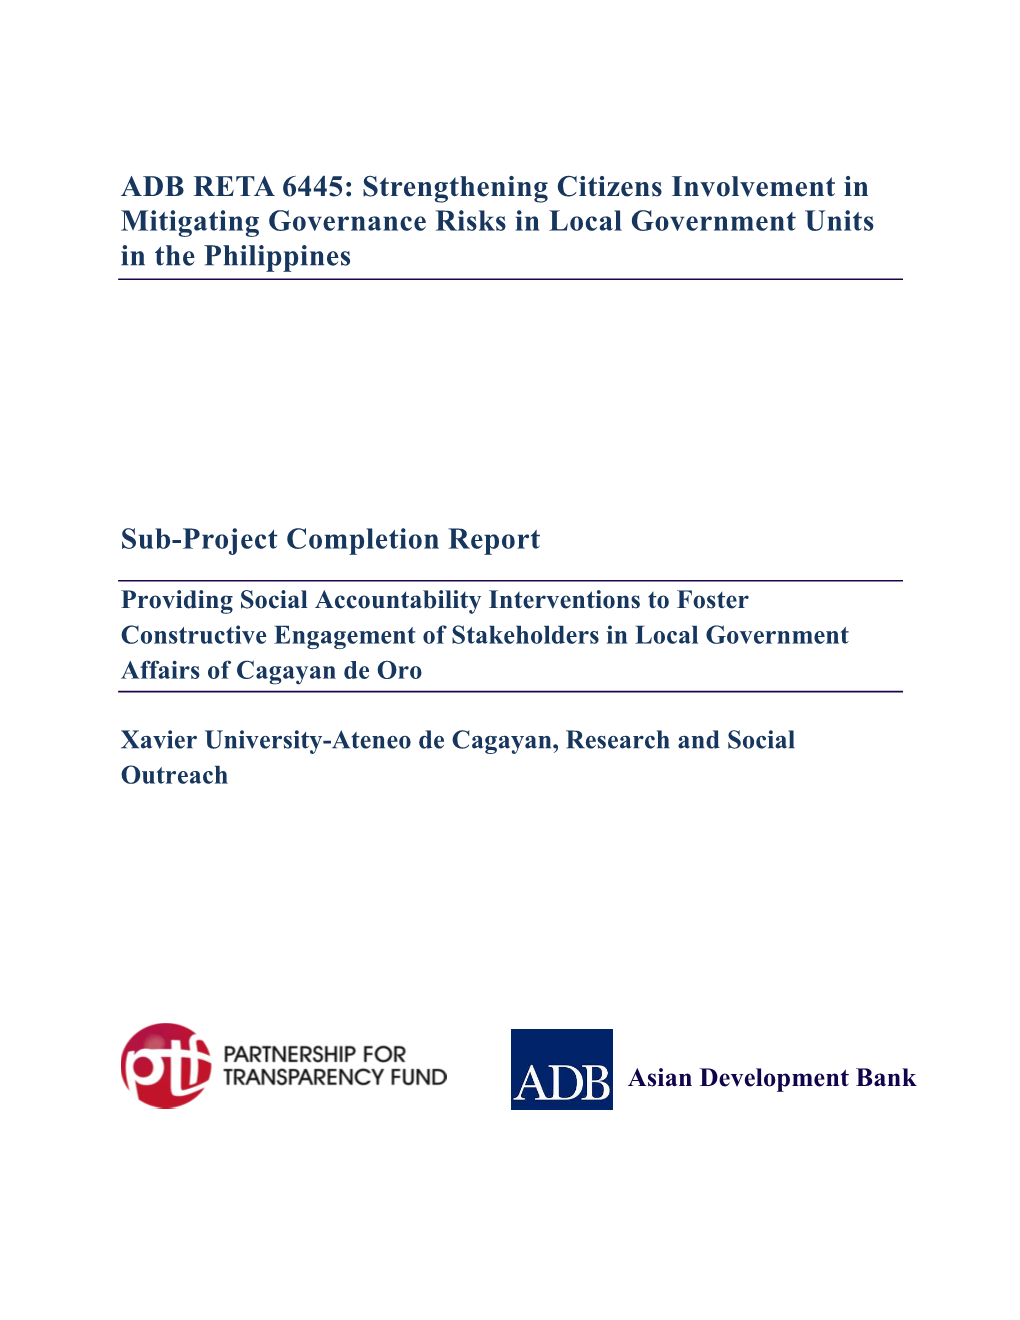 Download Project Completion Report